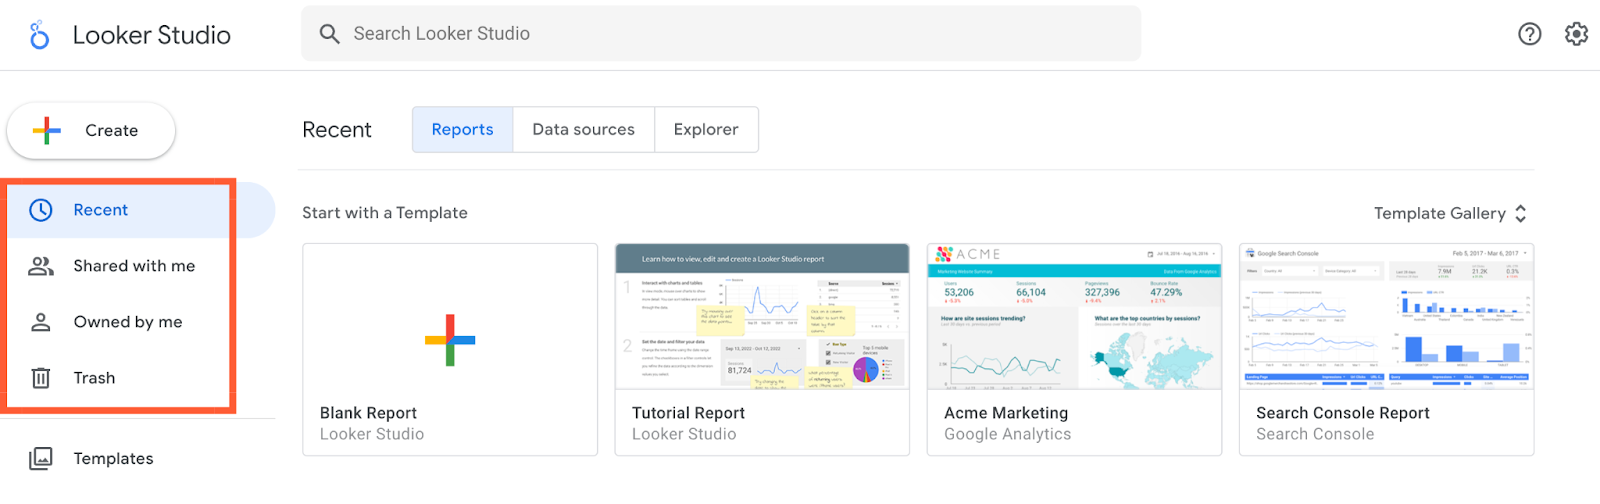 How to Use Google Looker Studio: Reports